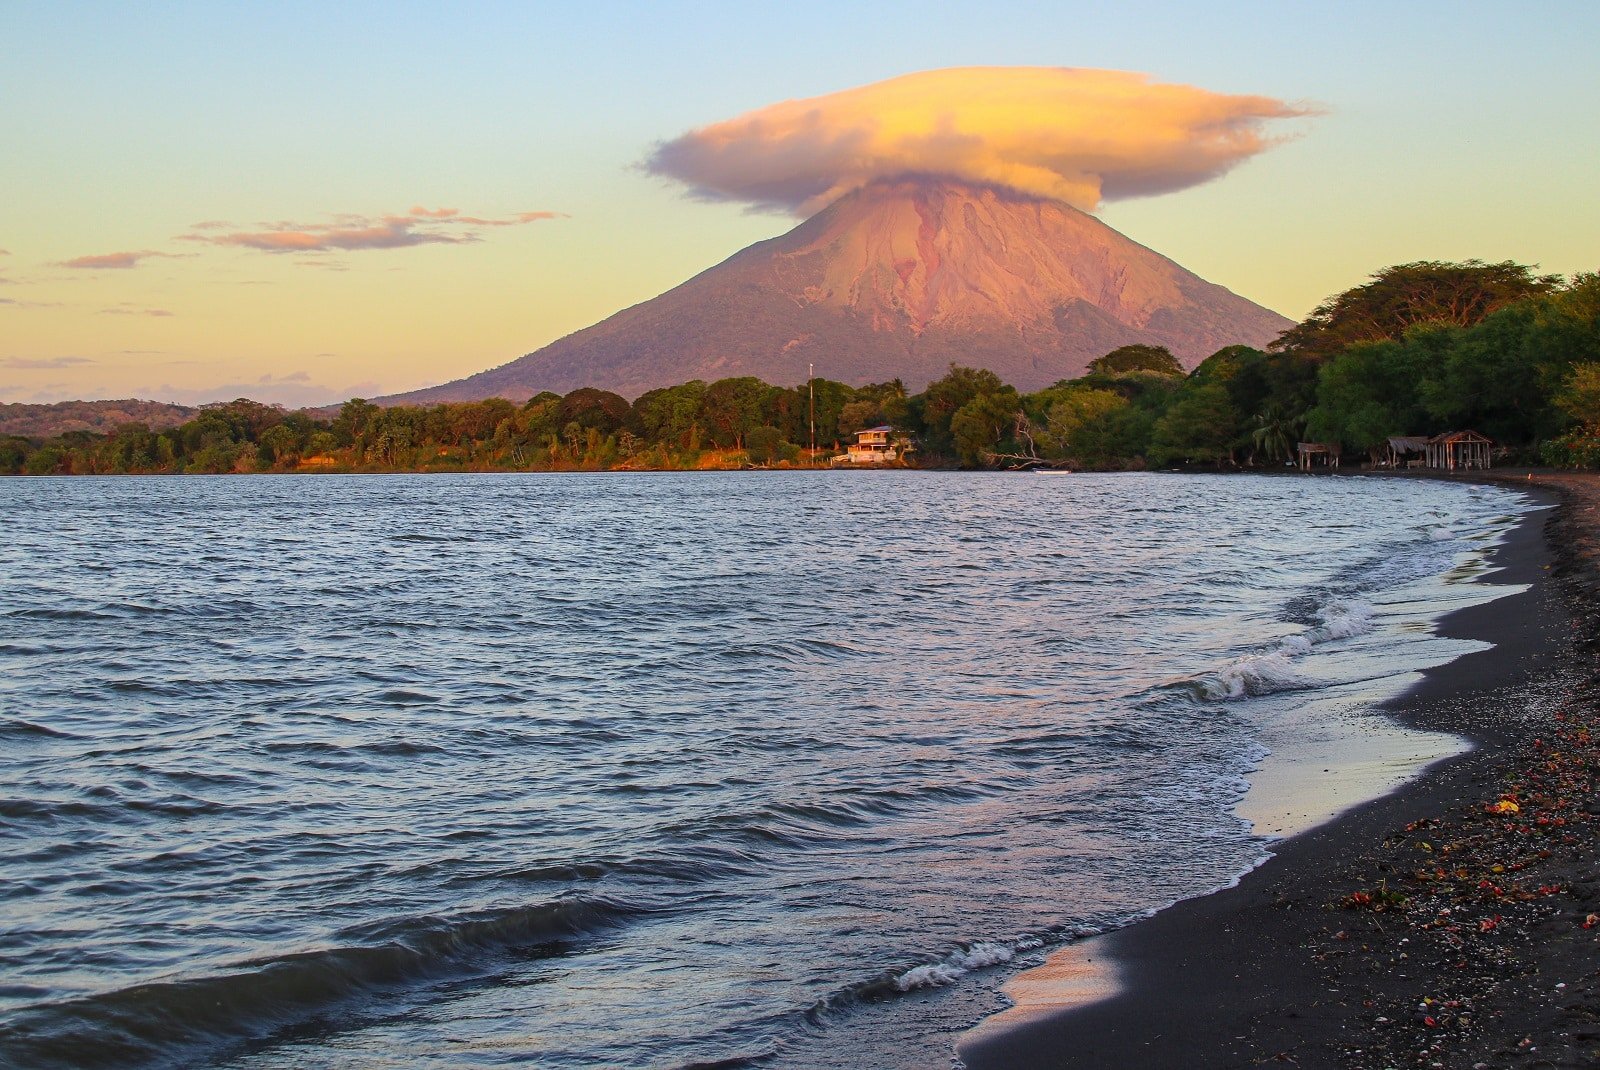 <p><span>Ometepe Island, formed by two volcanoes rising from Lake Nicaragua, is a unique destination for nature lovers and adventure seekers. The island offers hiking, kayaking, and wildlife viewing.</span></p> <p><span>The pre-Columbian petroglyphs scattered across the island add a historical dimension to its natural beauty. Ometepe is a place of tranquility and adventure where you can connect with nature and local culture.</span></p> <p><b>Insider’s Tip: </b><span>Rent a scooter or bike to explore the island’s diverse landscapes. </span></p> <p><b>When to Travel: </b><span>November to April for the best weather. </span></p> <p><b>How to Get There: </b><span>Take a ferry from San Jorge on the mainland.</span></p>